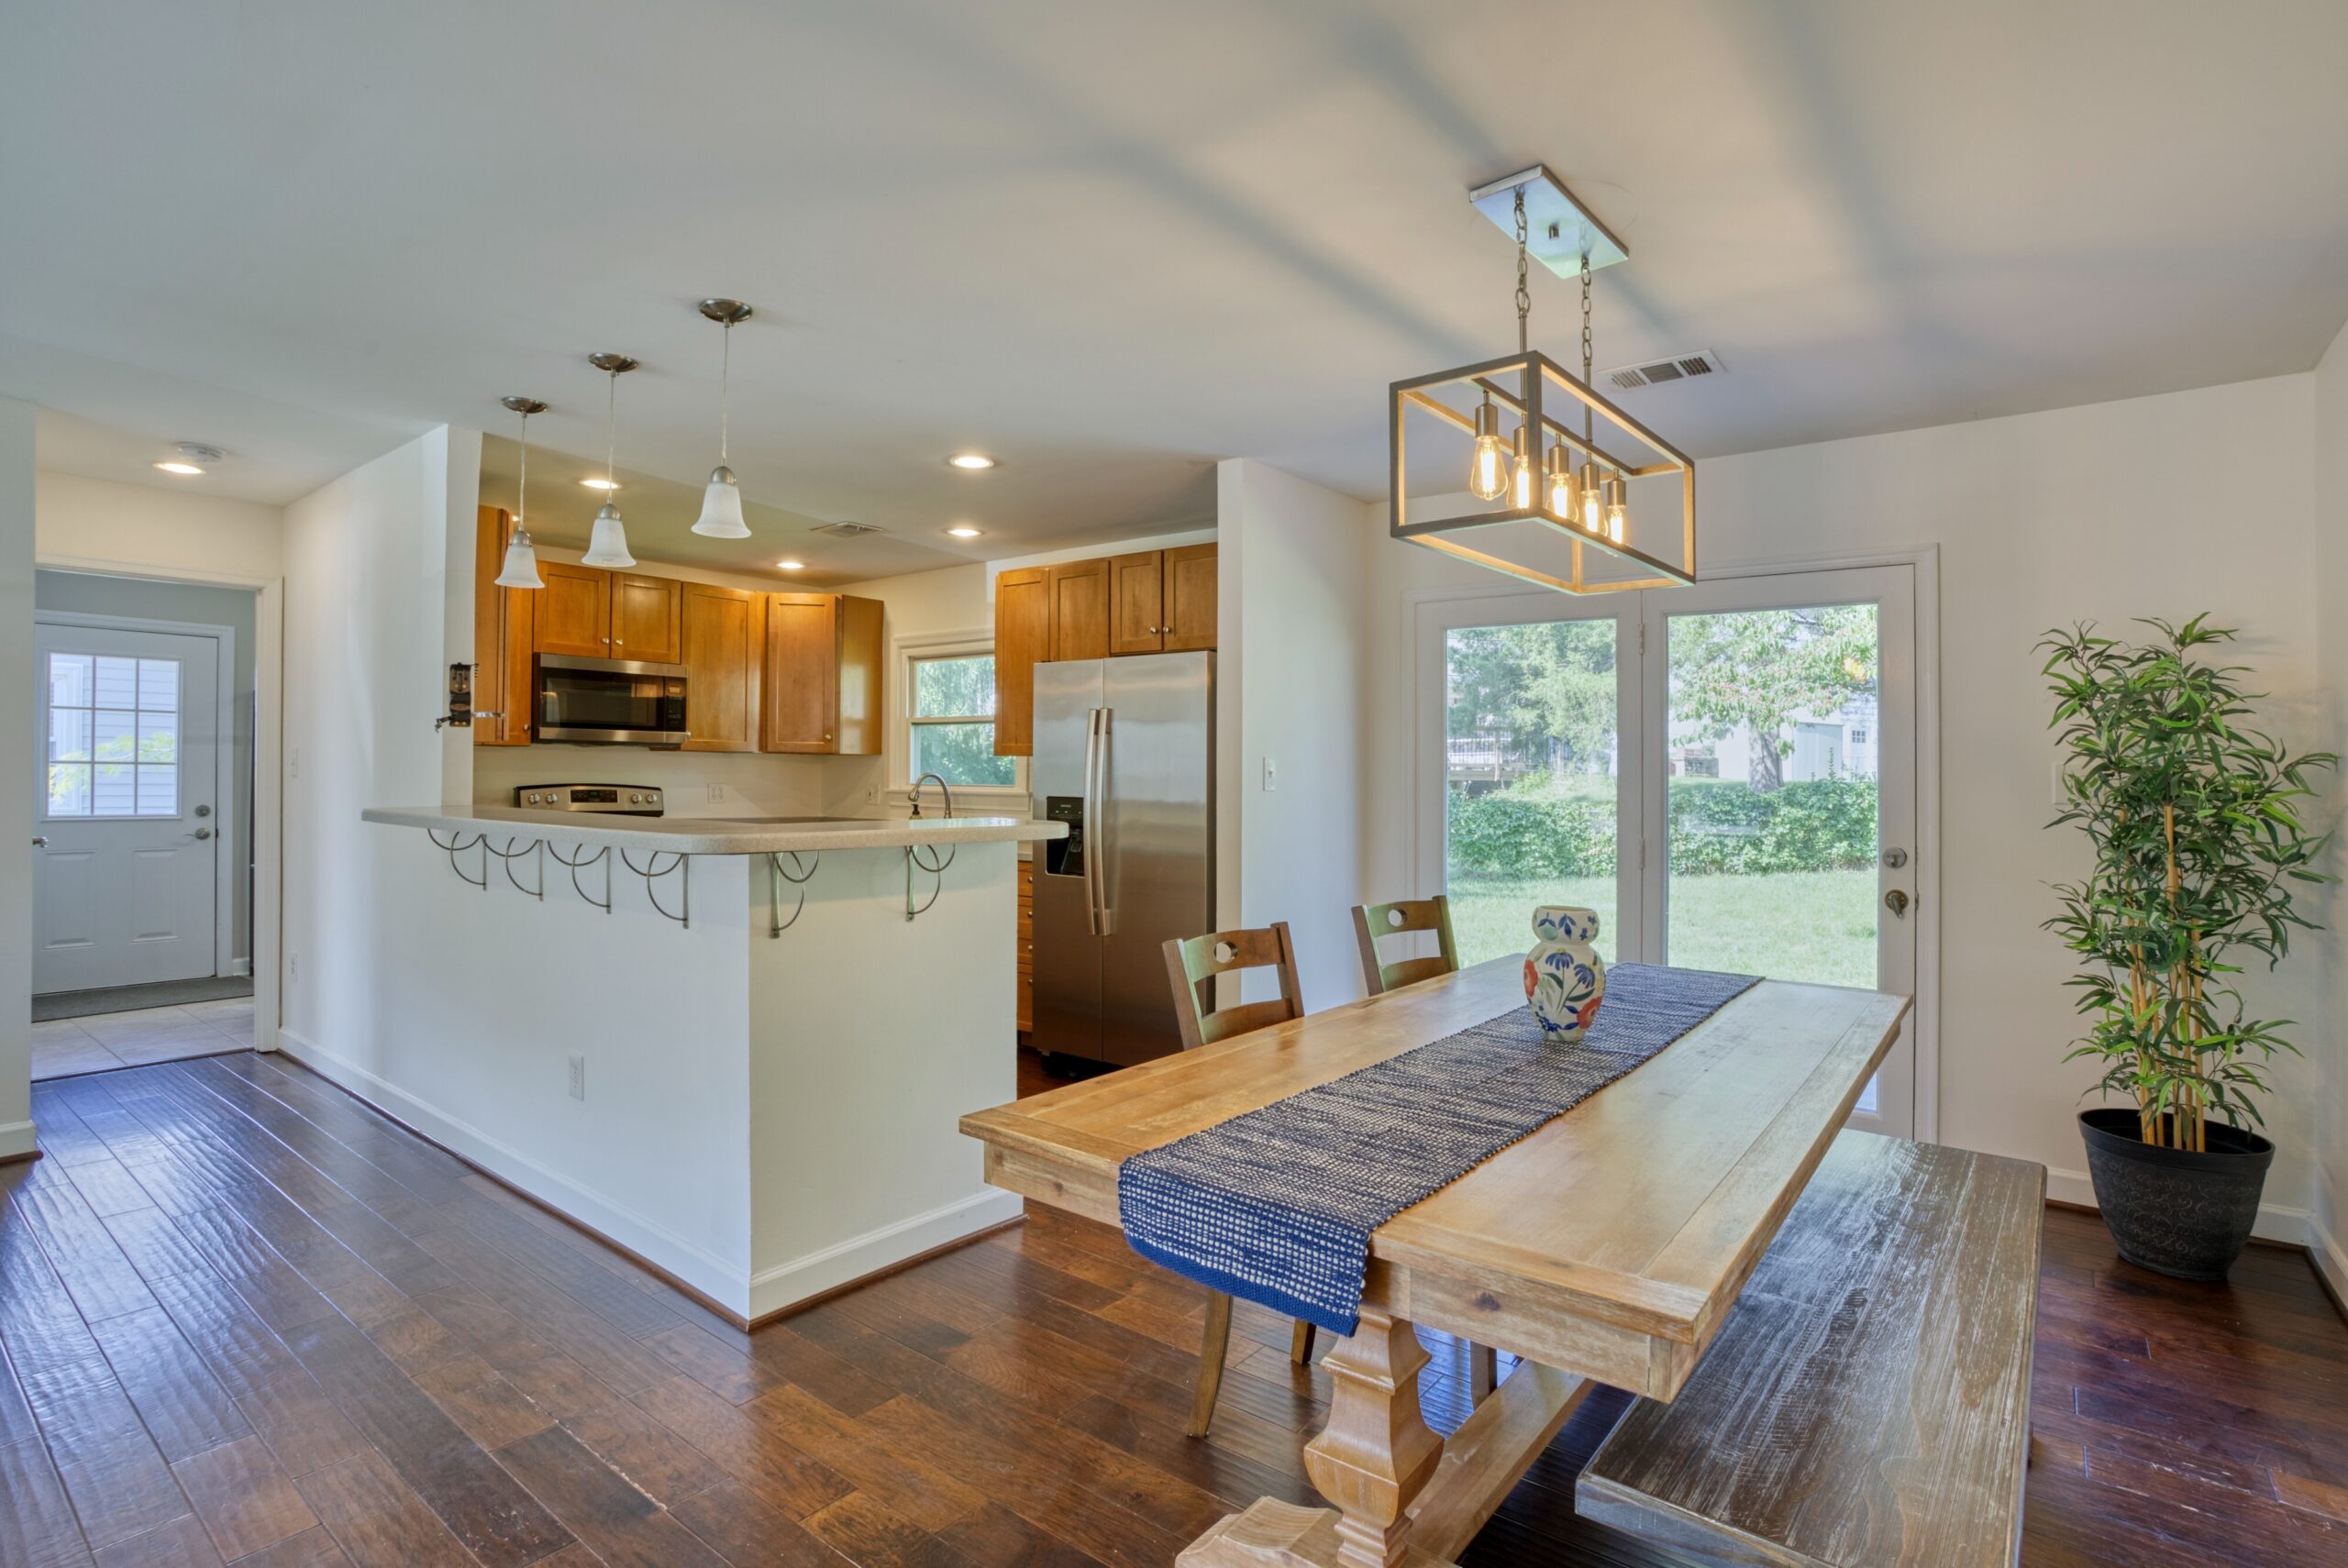 Professional interior photo of 1103 S Greenthorn Ave in Sterling, VA - showing the dining area outside of the kitchen with a high bar top ready for stools